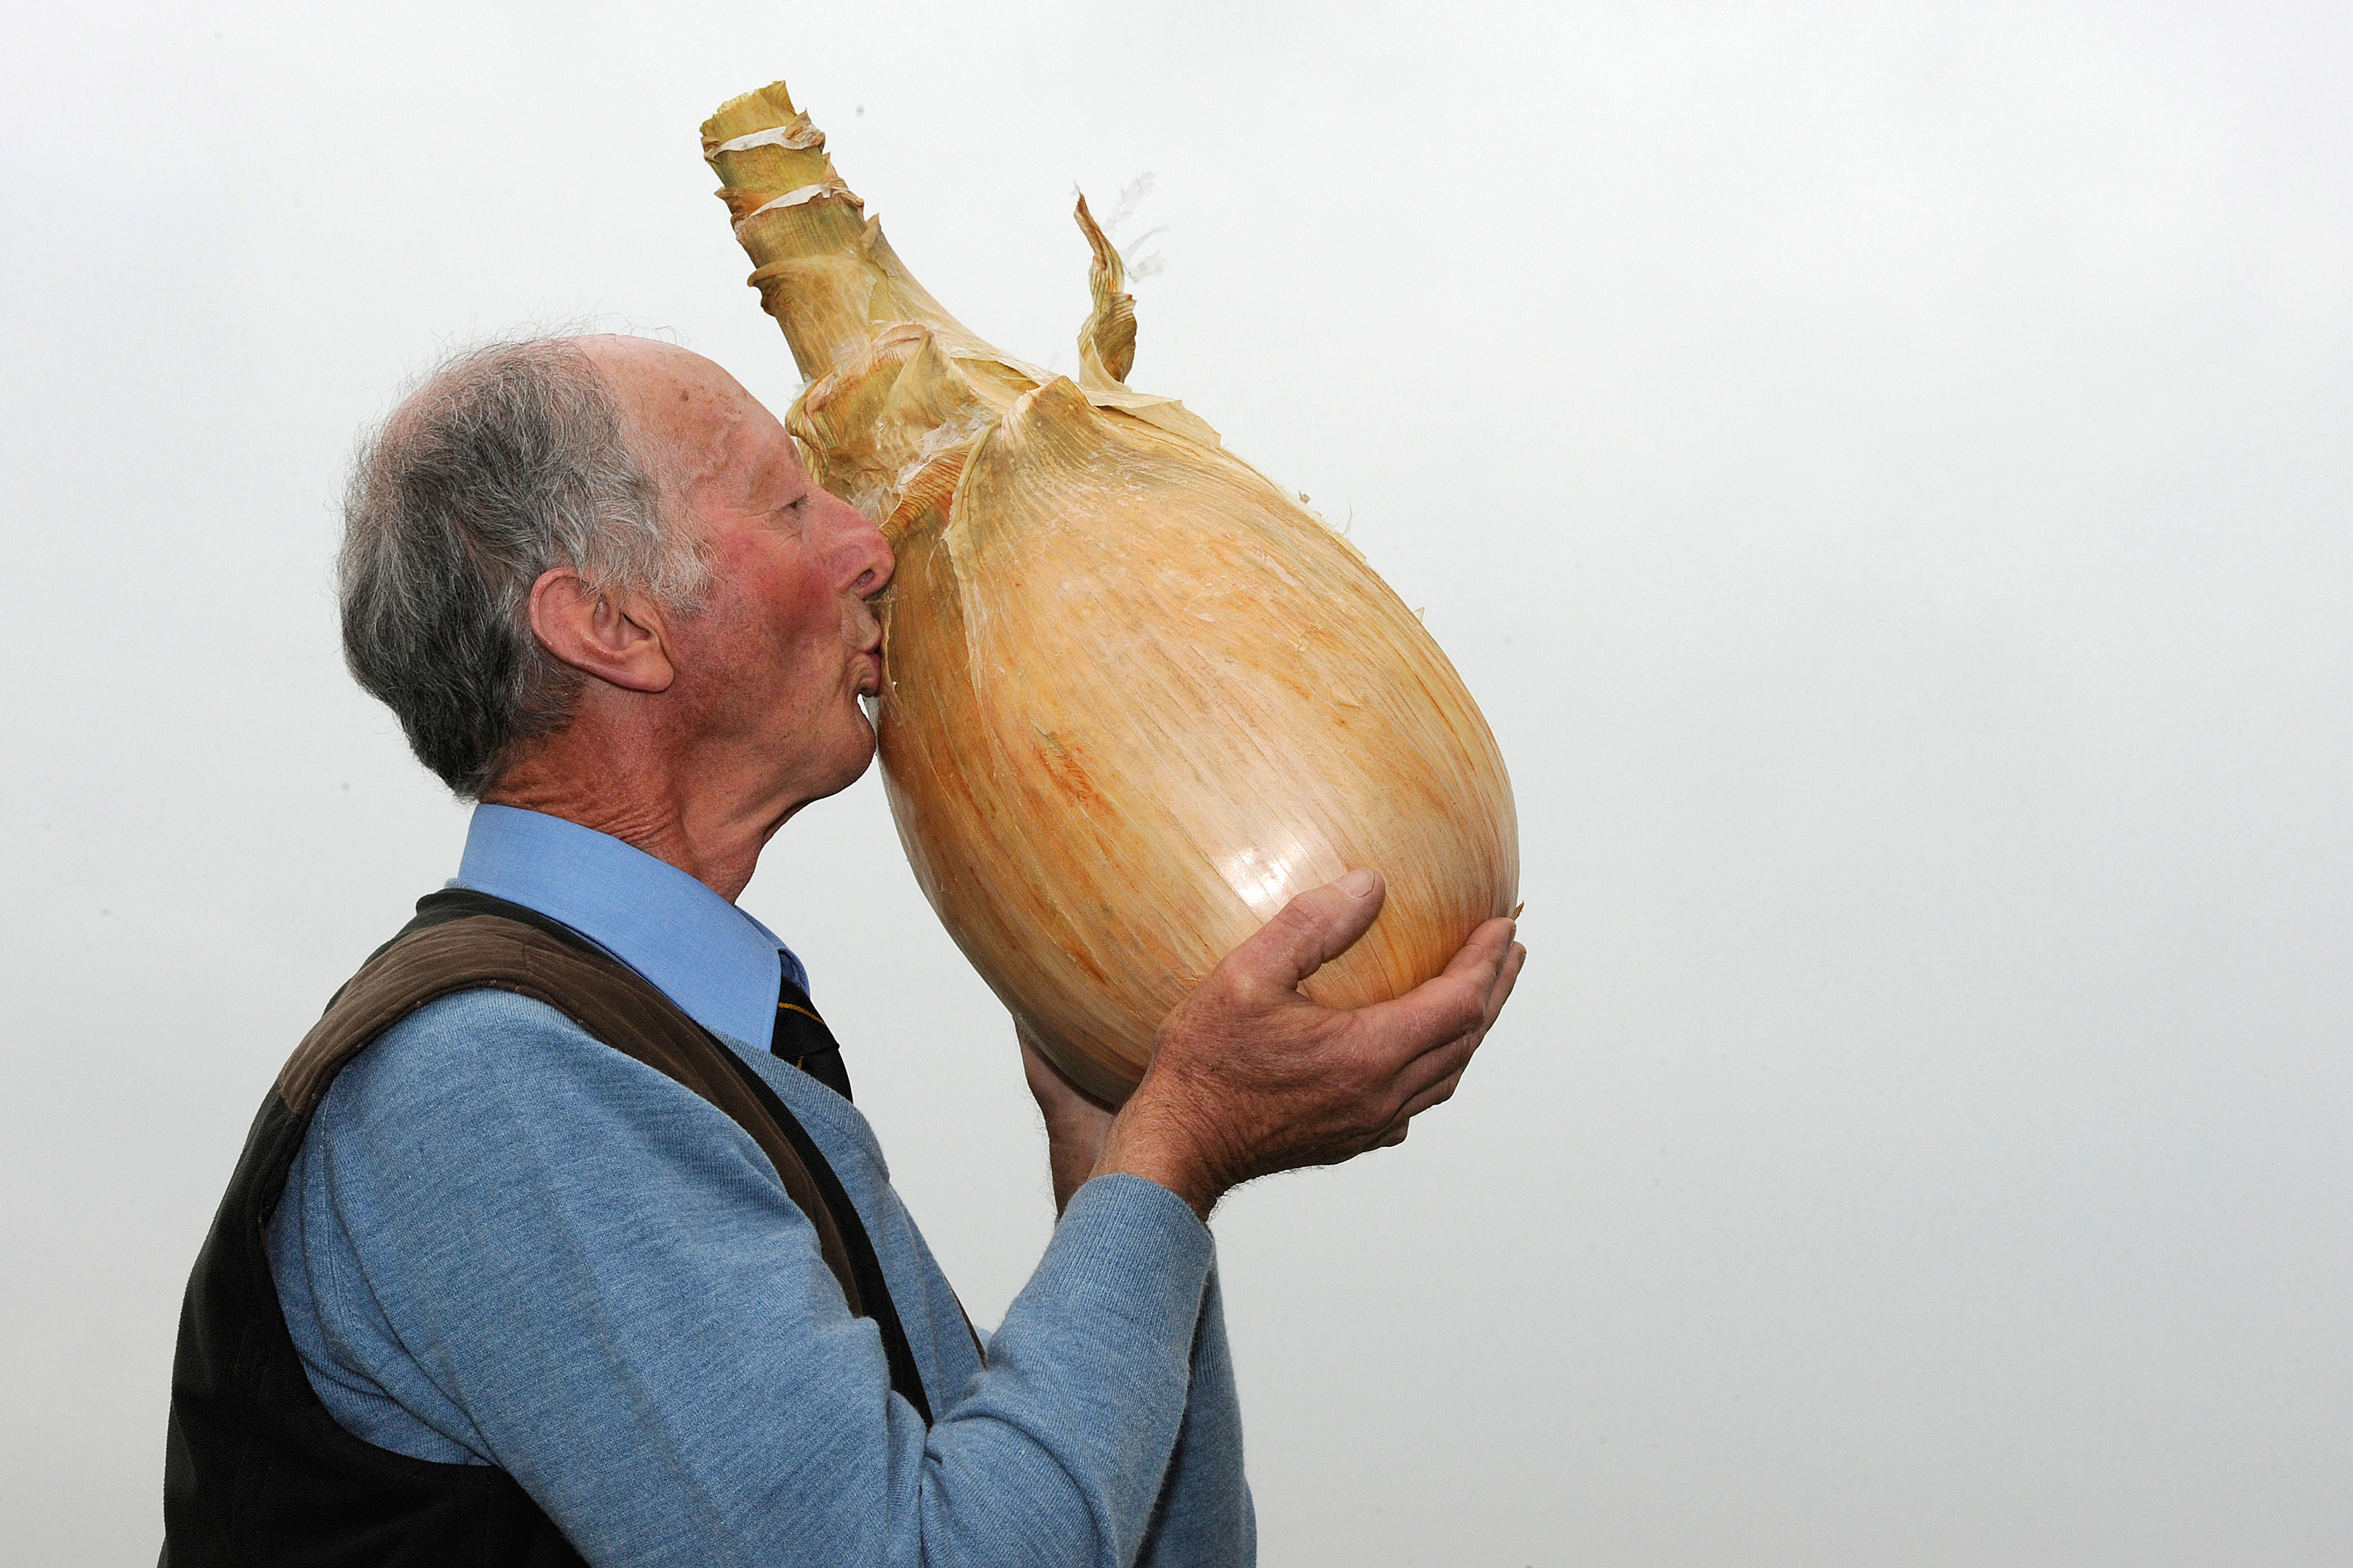 Grower Pete Glazebrook poses for photographers with his onion weighing 17lb 15.5oz  at the Harrogate Autumn Flower Show in Harrogate, northern England September 16, 2011. (Nigel Roddis—Reuters)